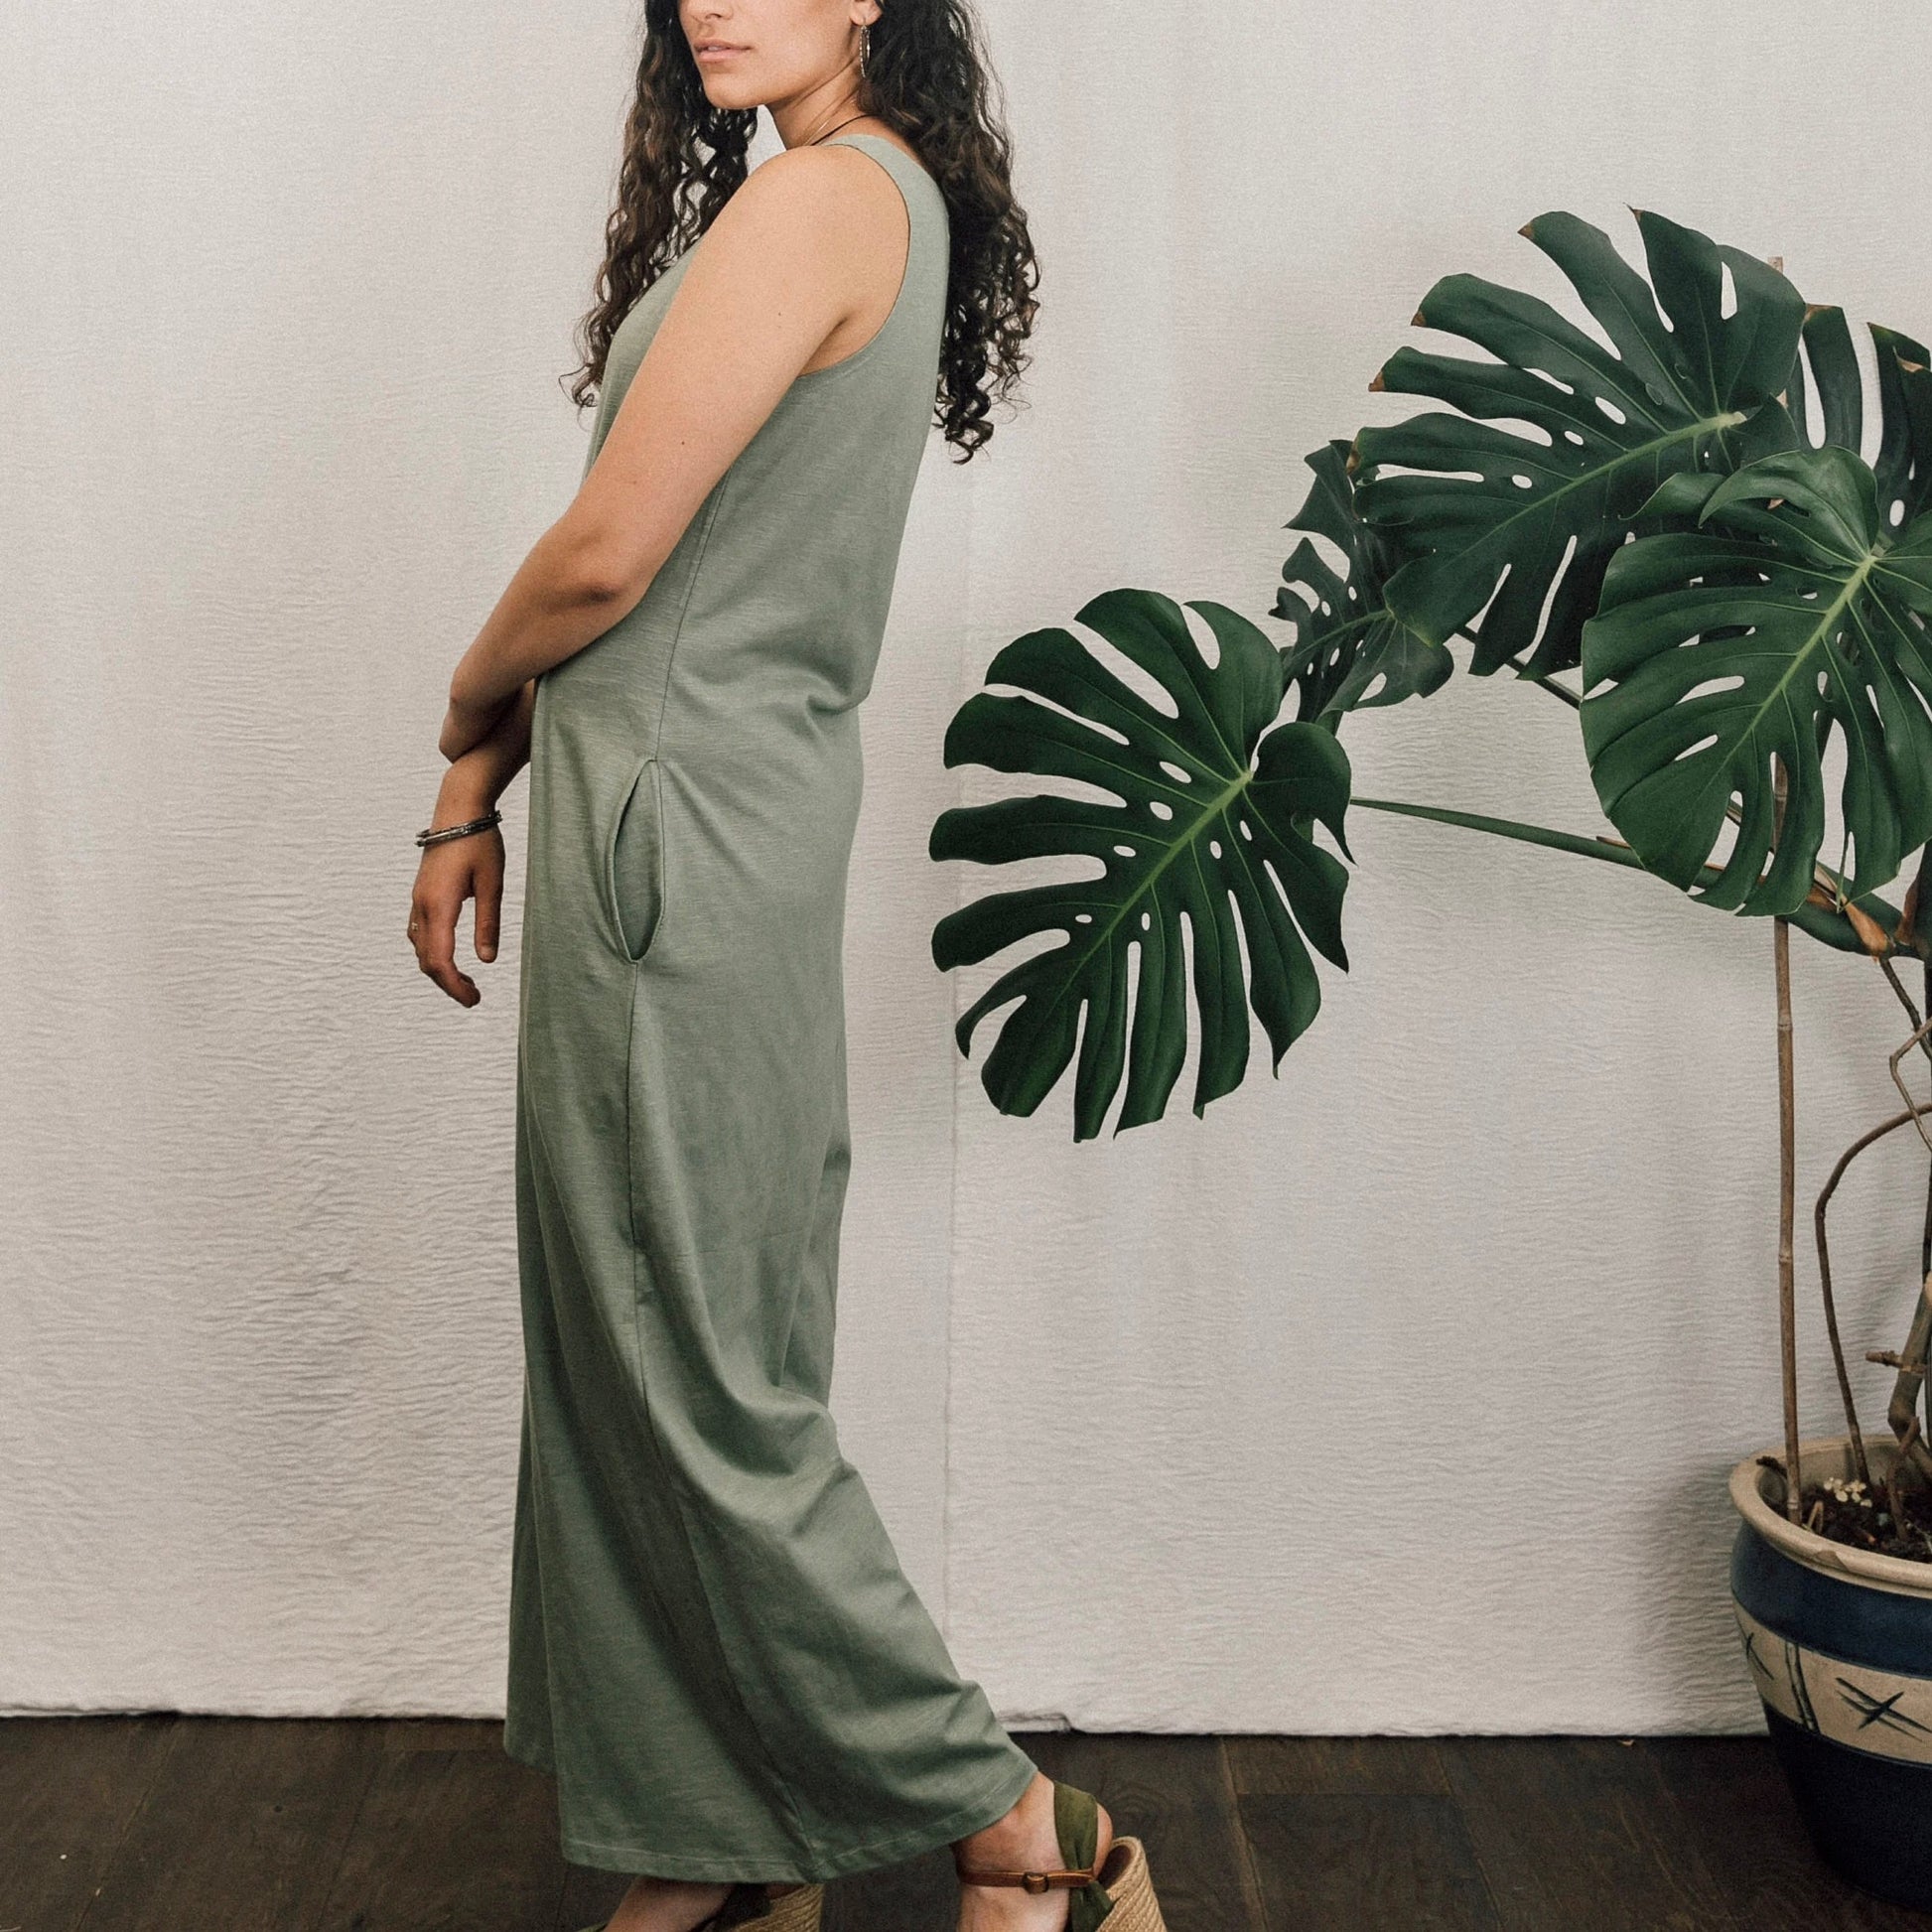 woman wearing green jumpsuit stood by plant